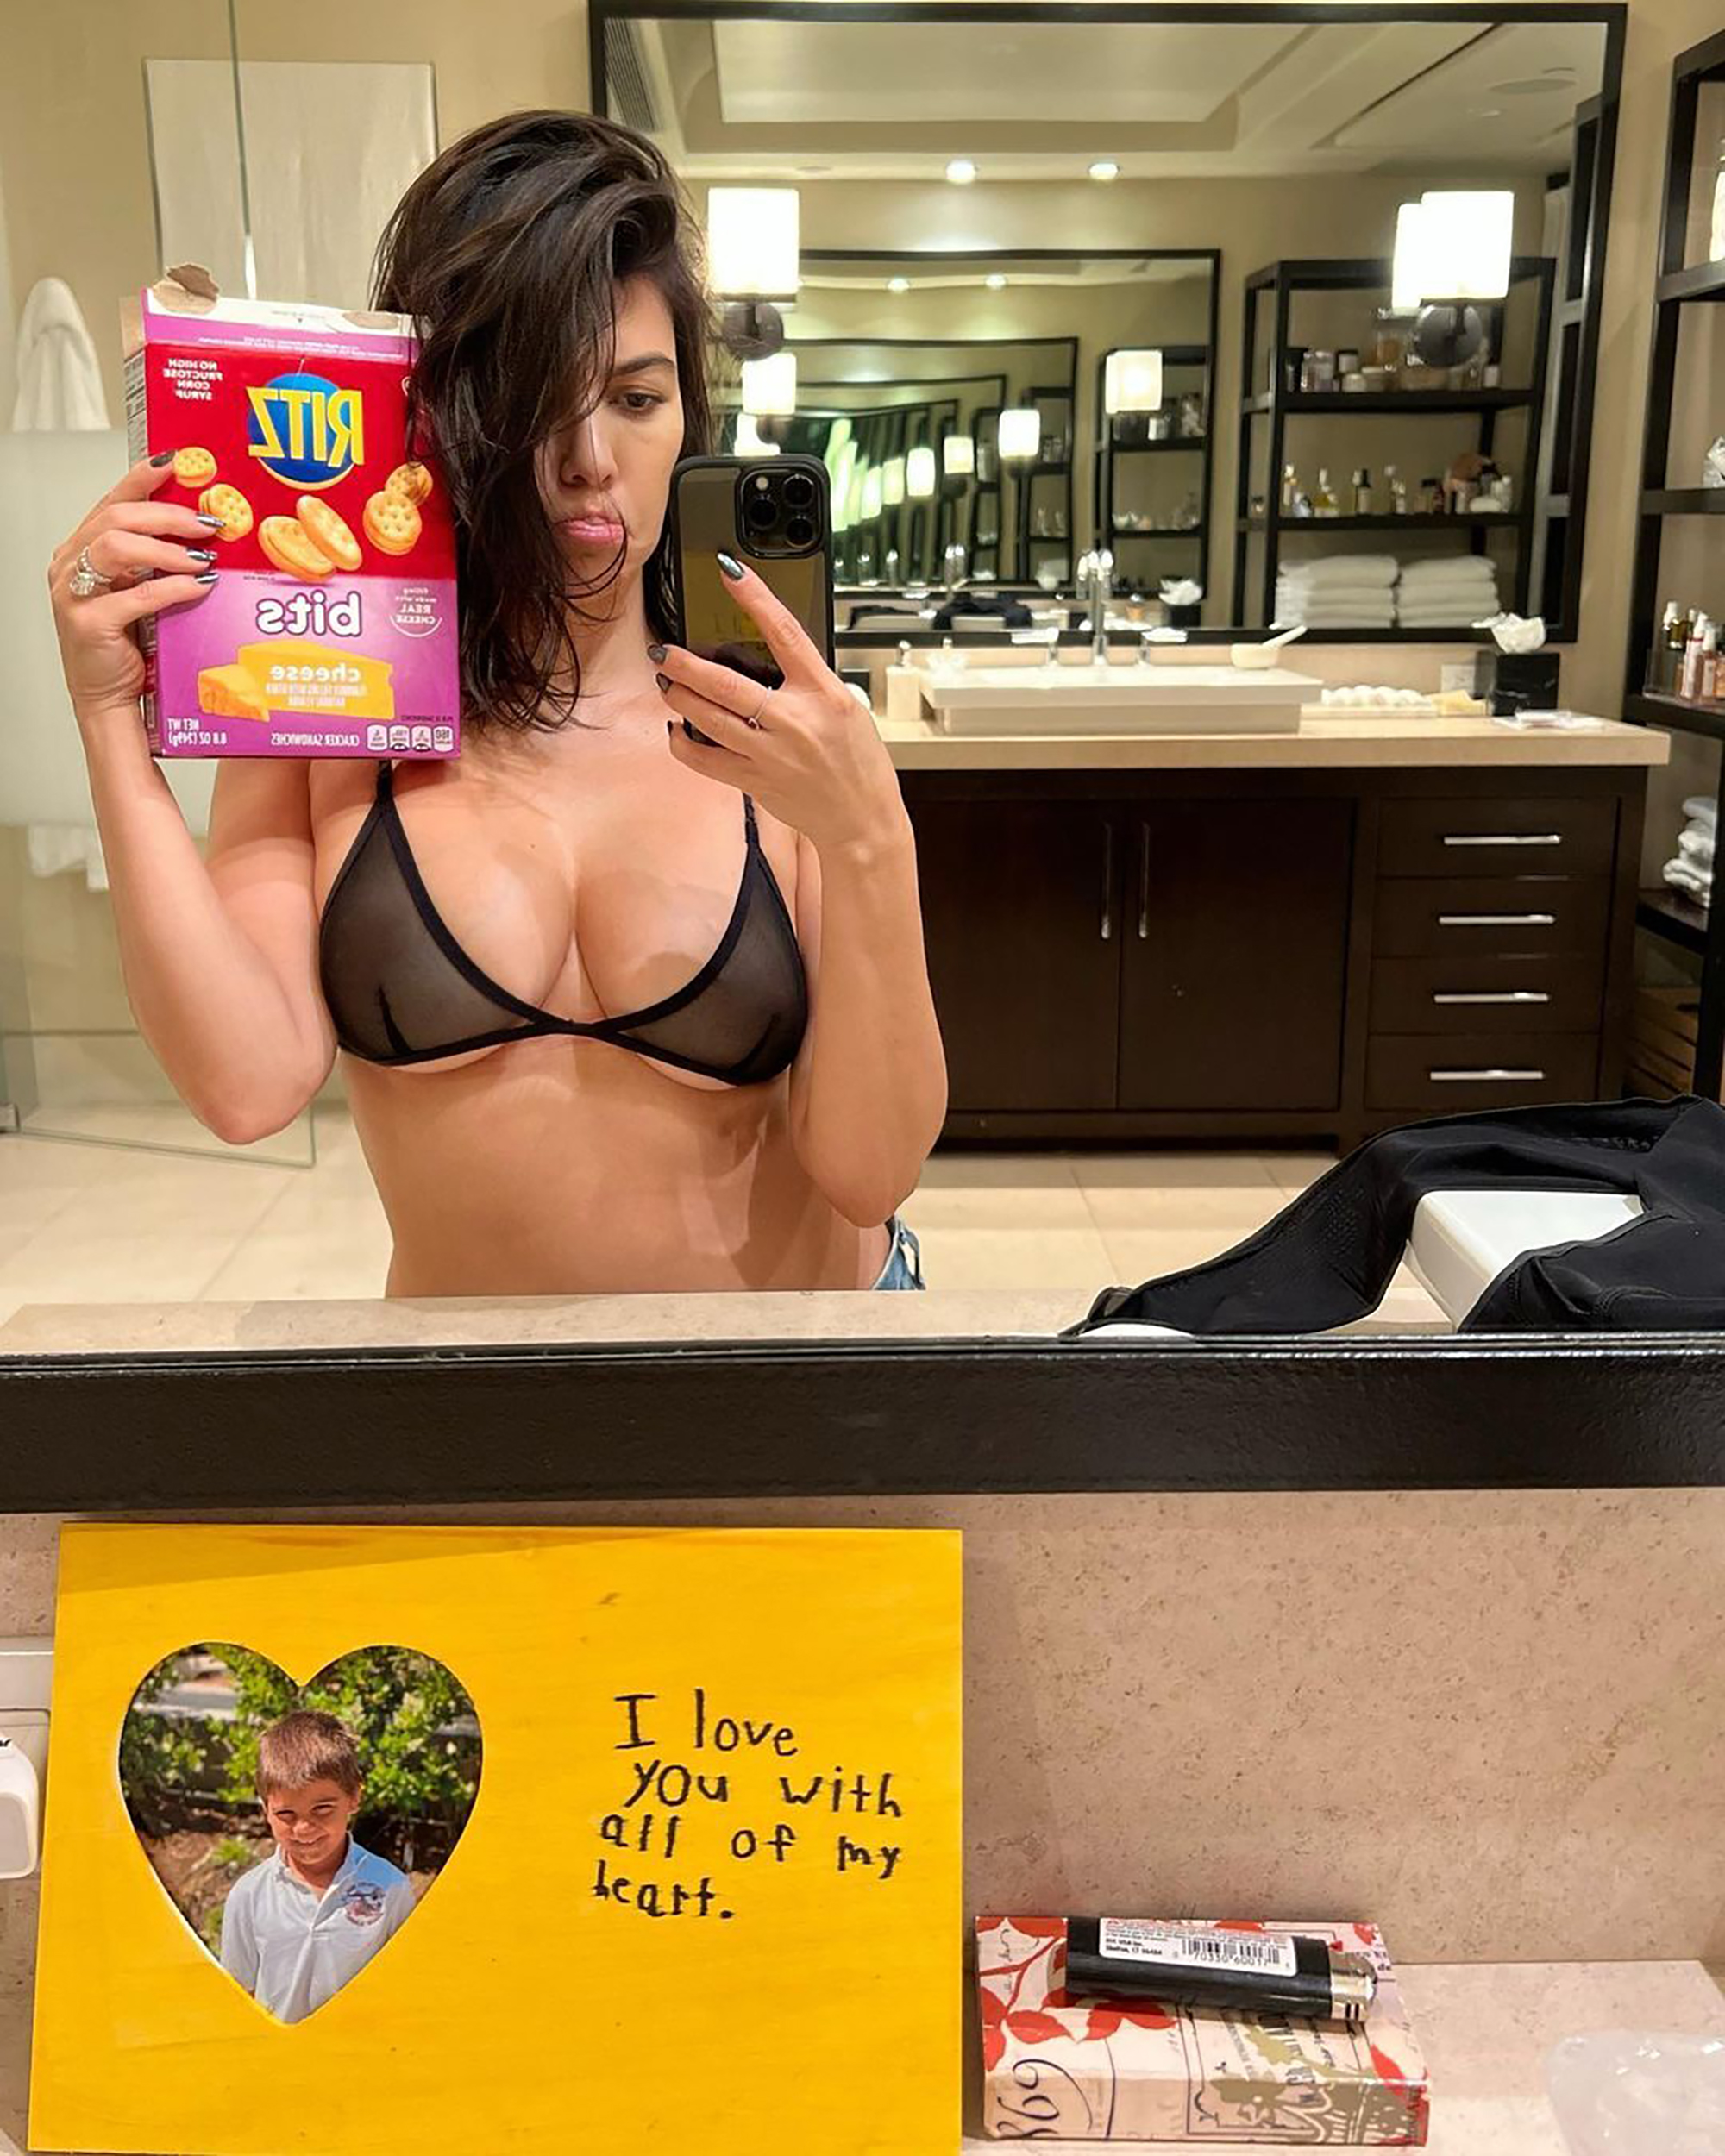 Kourtney Kardashian shares a sweet note from her son Reign while standing in her bra with a box of Ritz Bits.